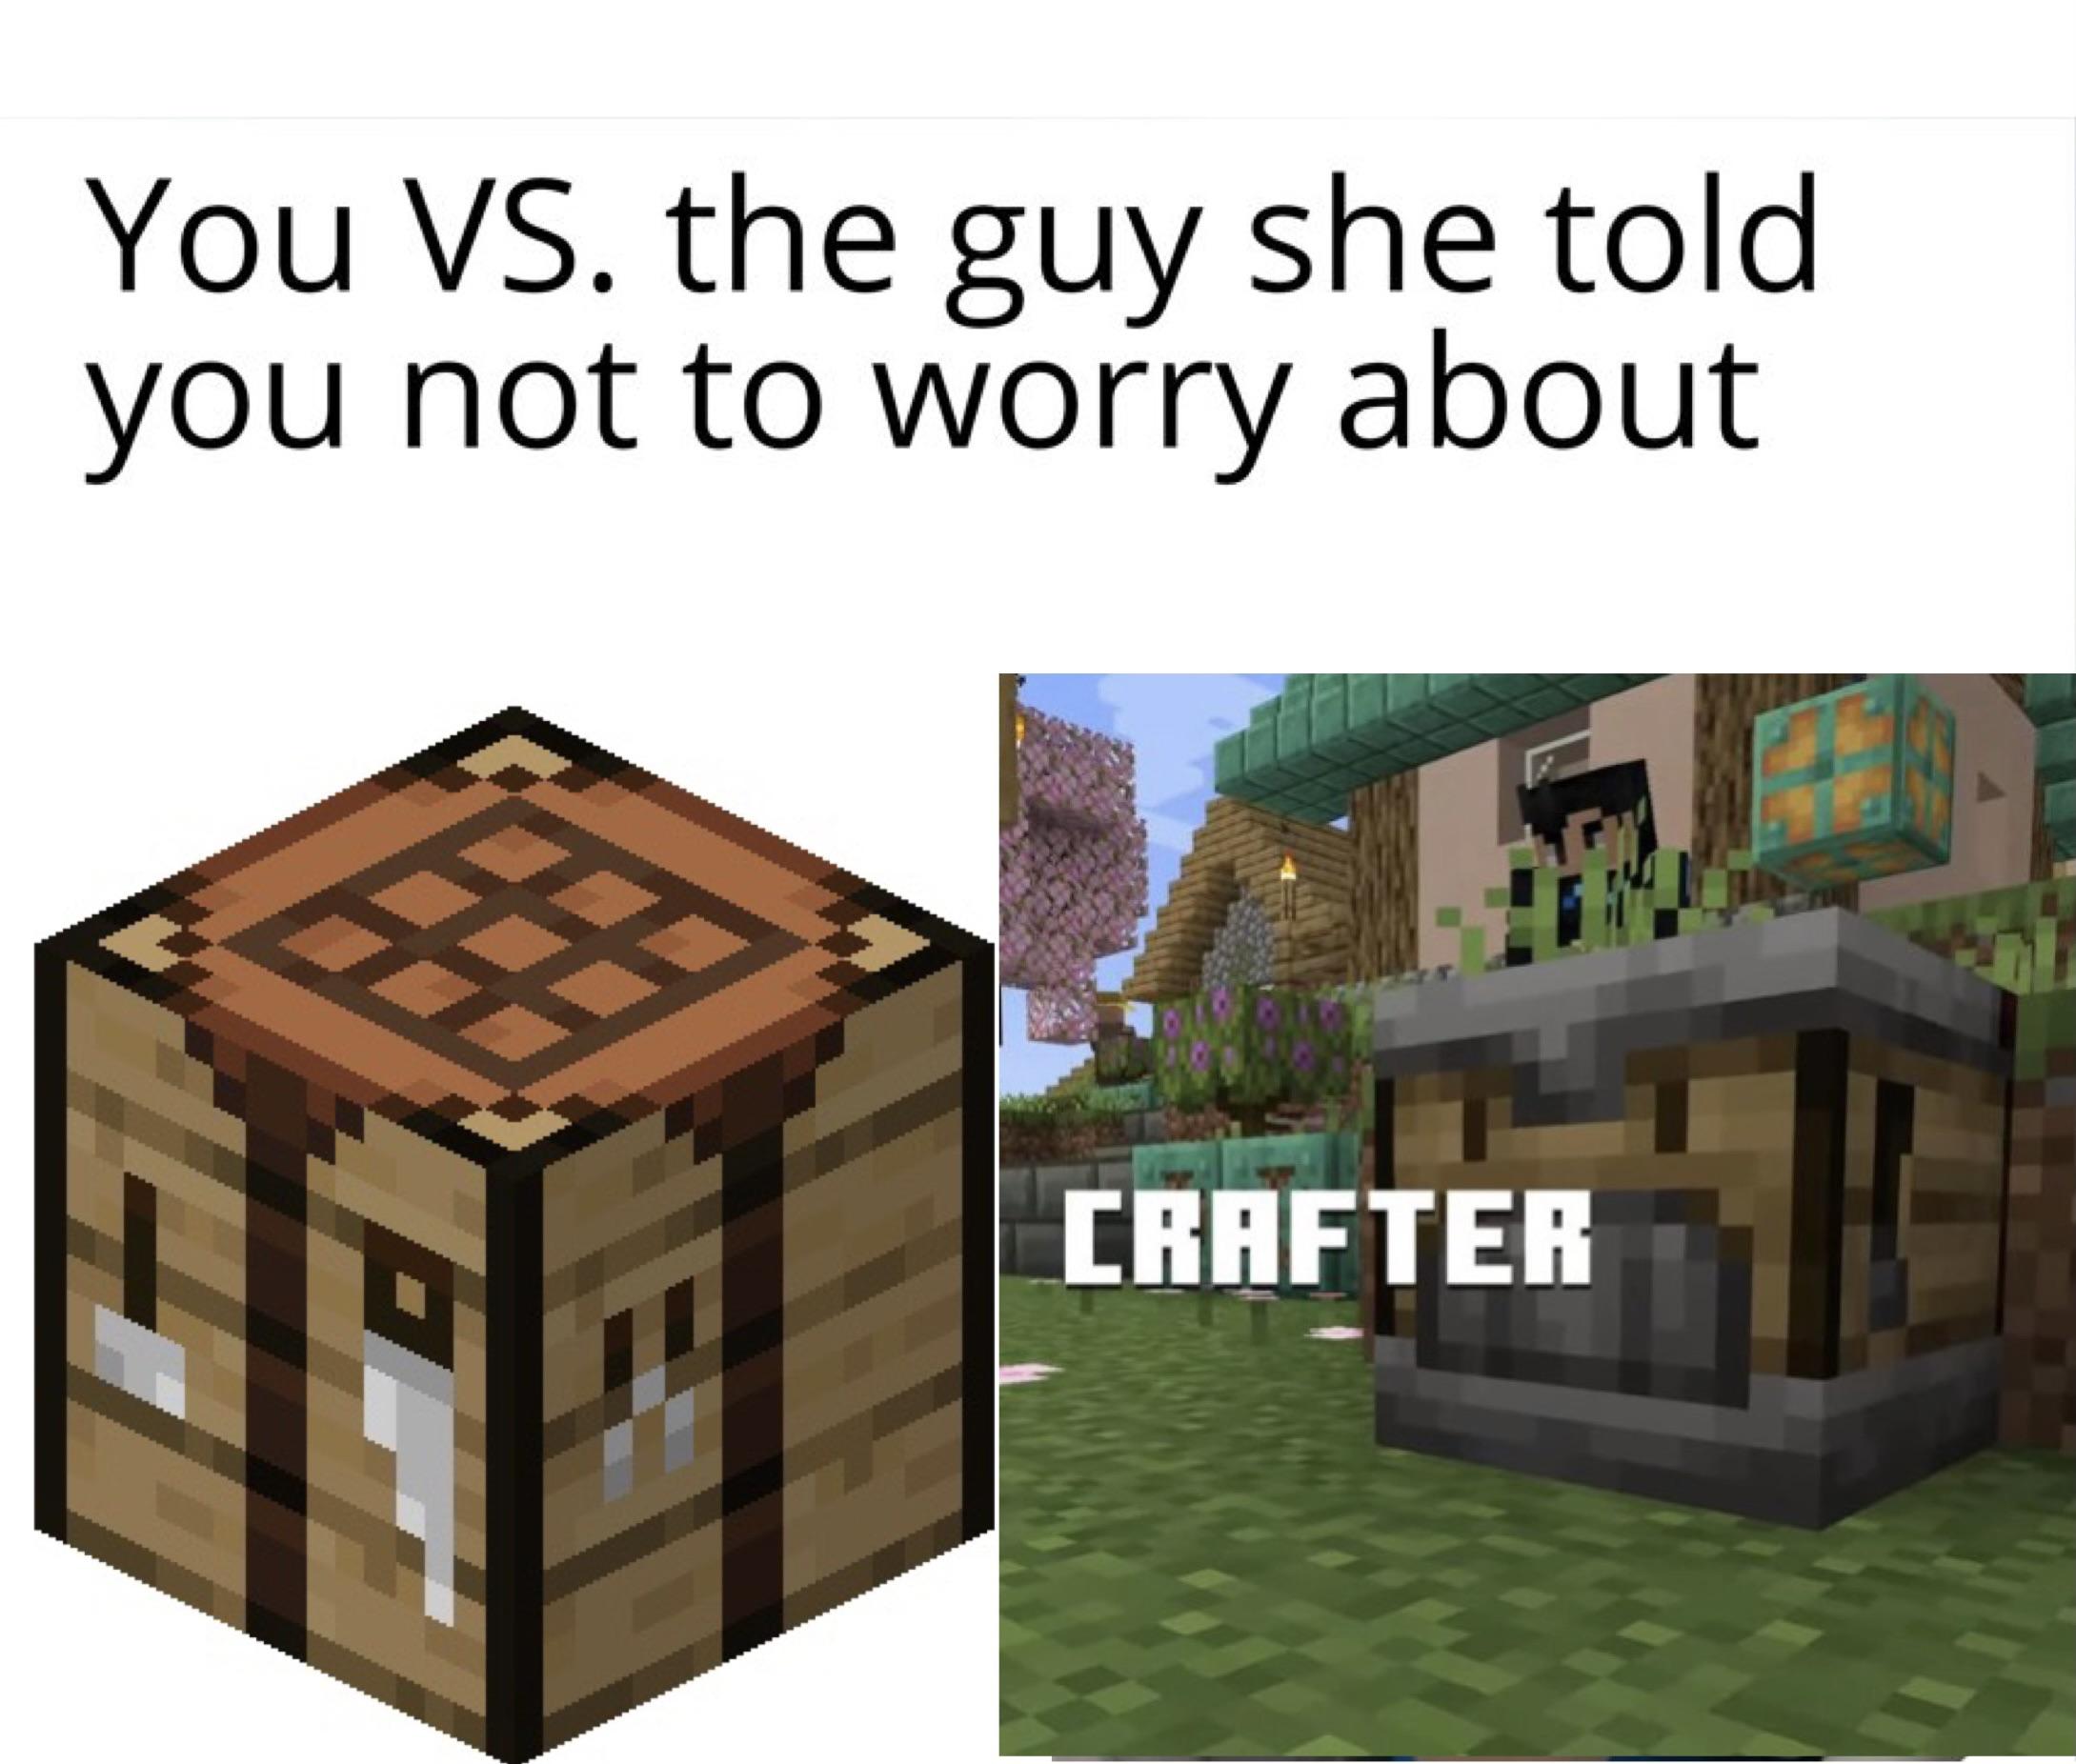 Minecraft Memes - meme I made about the new crafter block!